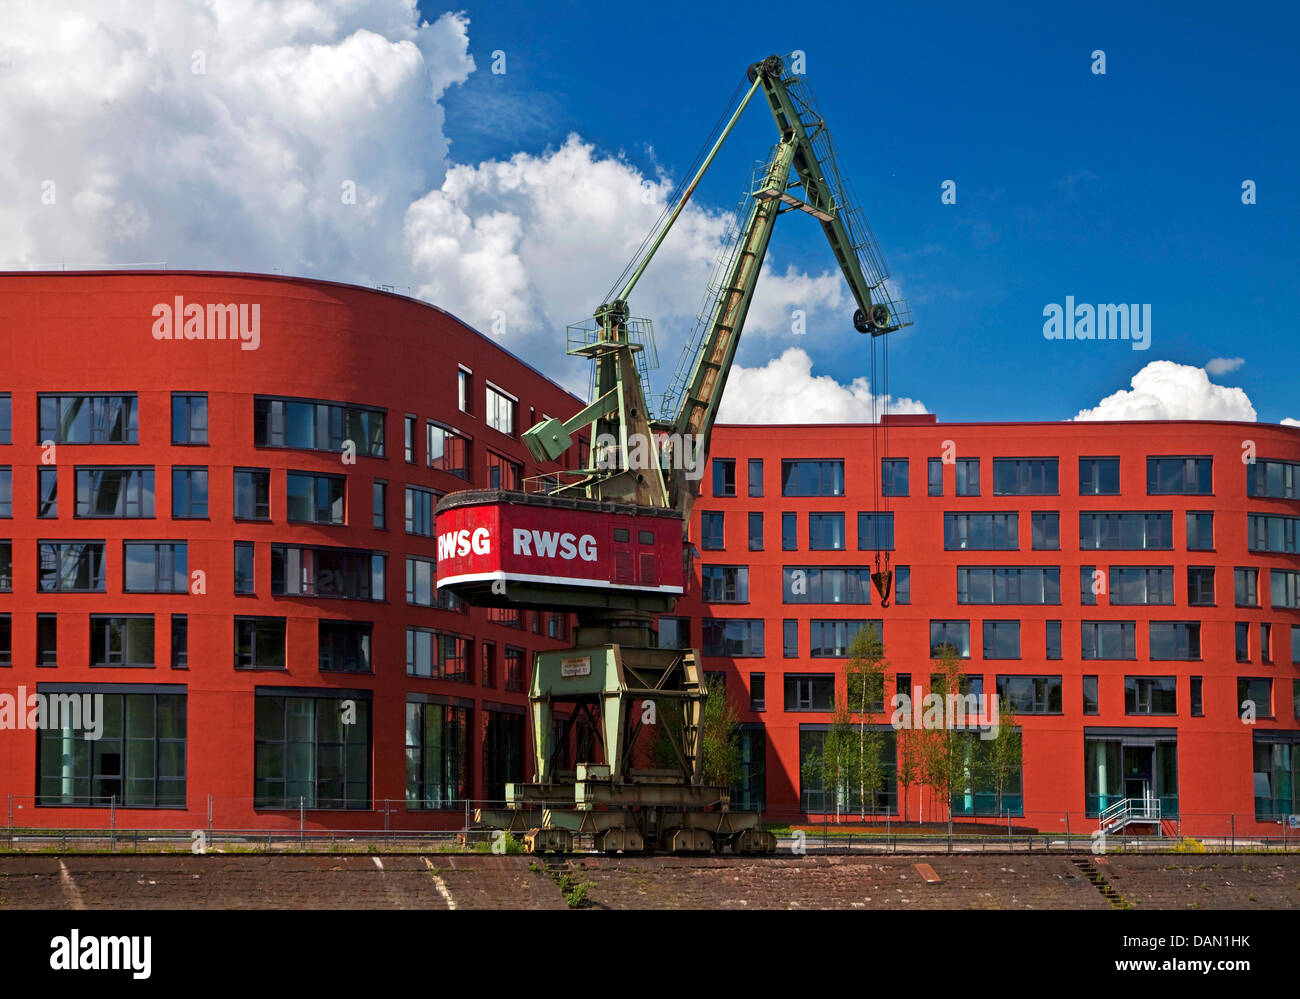 Landesarchiv NRW with crane in the inner harbour, Germany, North Rhine-Westphalia, Ruhr Area, Duisburg Stock Photo